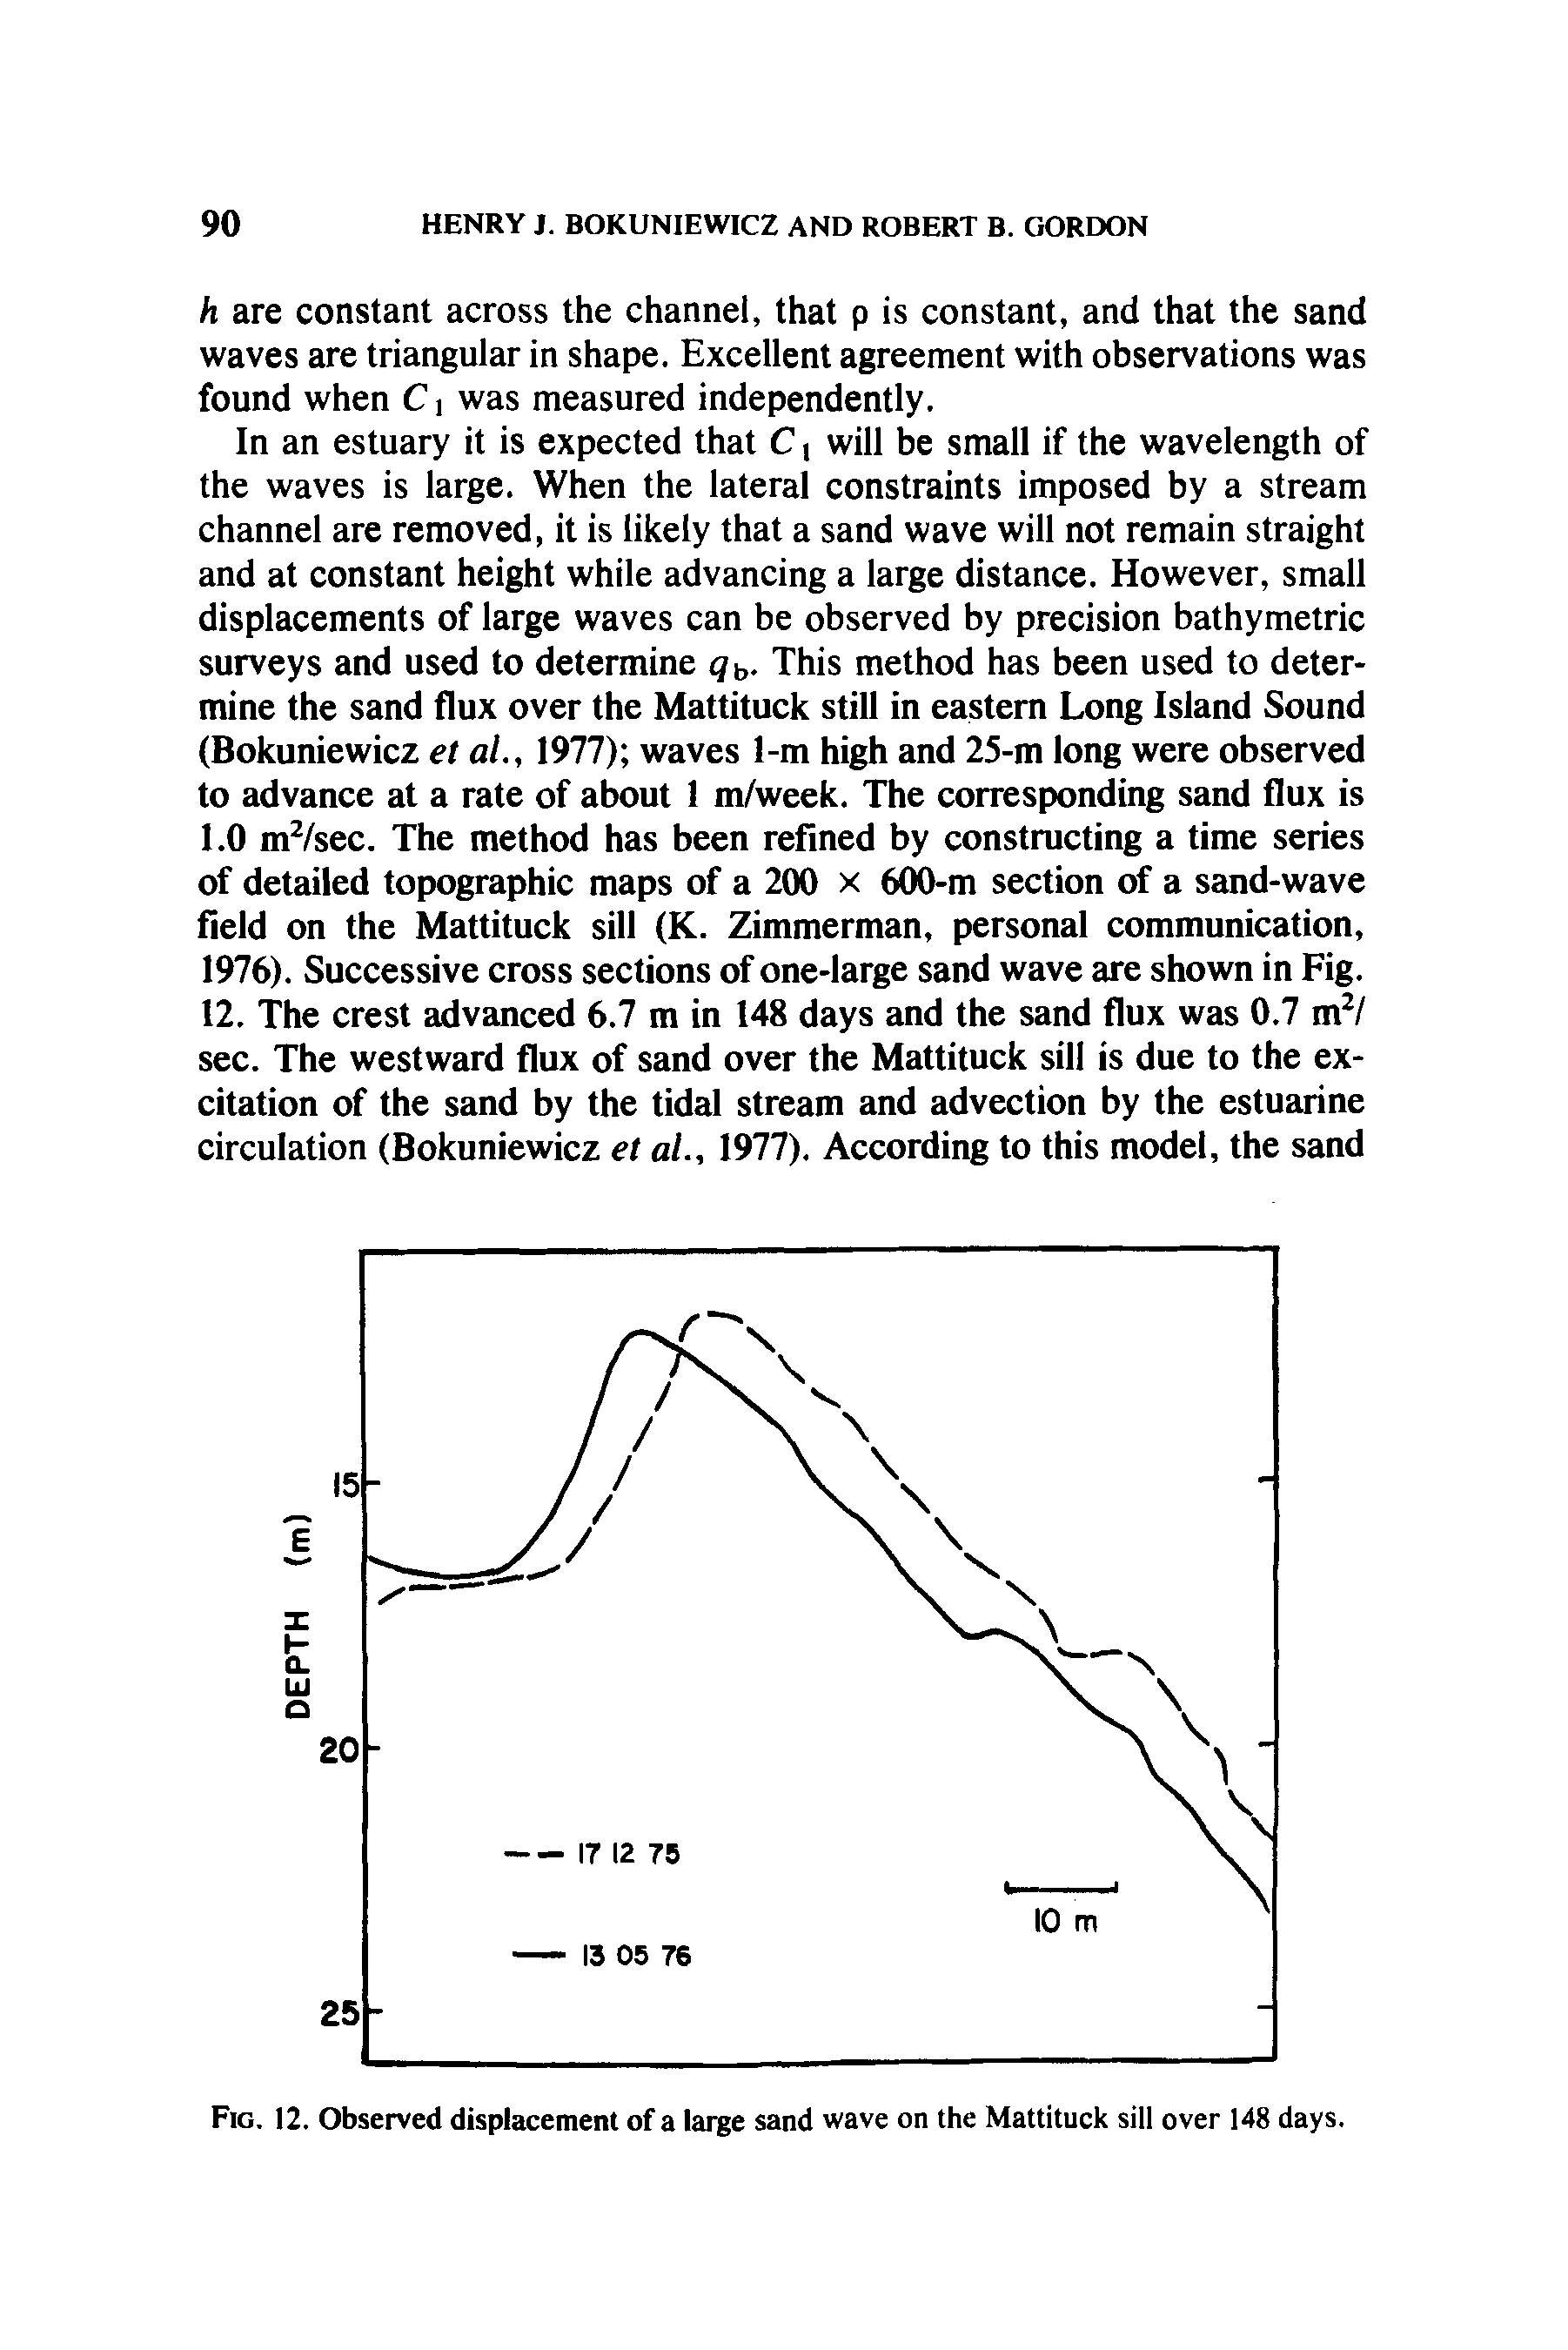 Fig. 12. Observed displacement of a large sand wave on the Mattituck sill over 148 days.